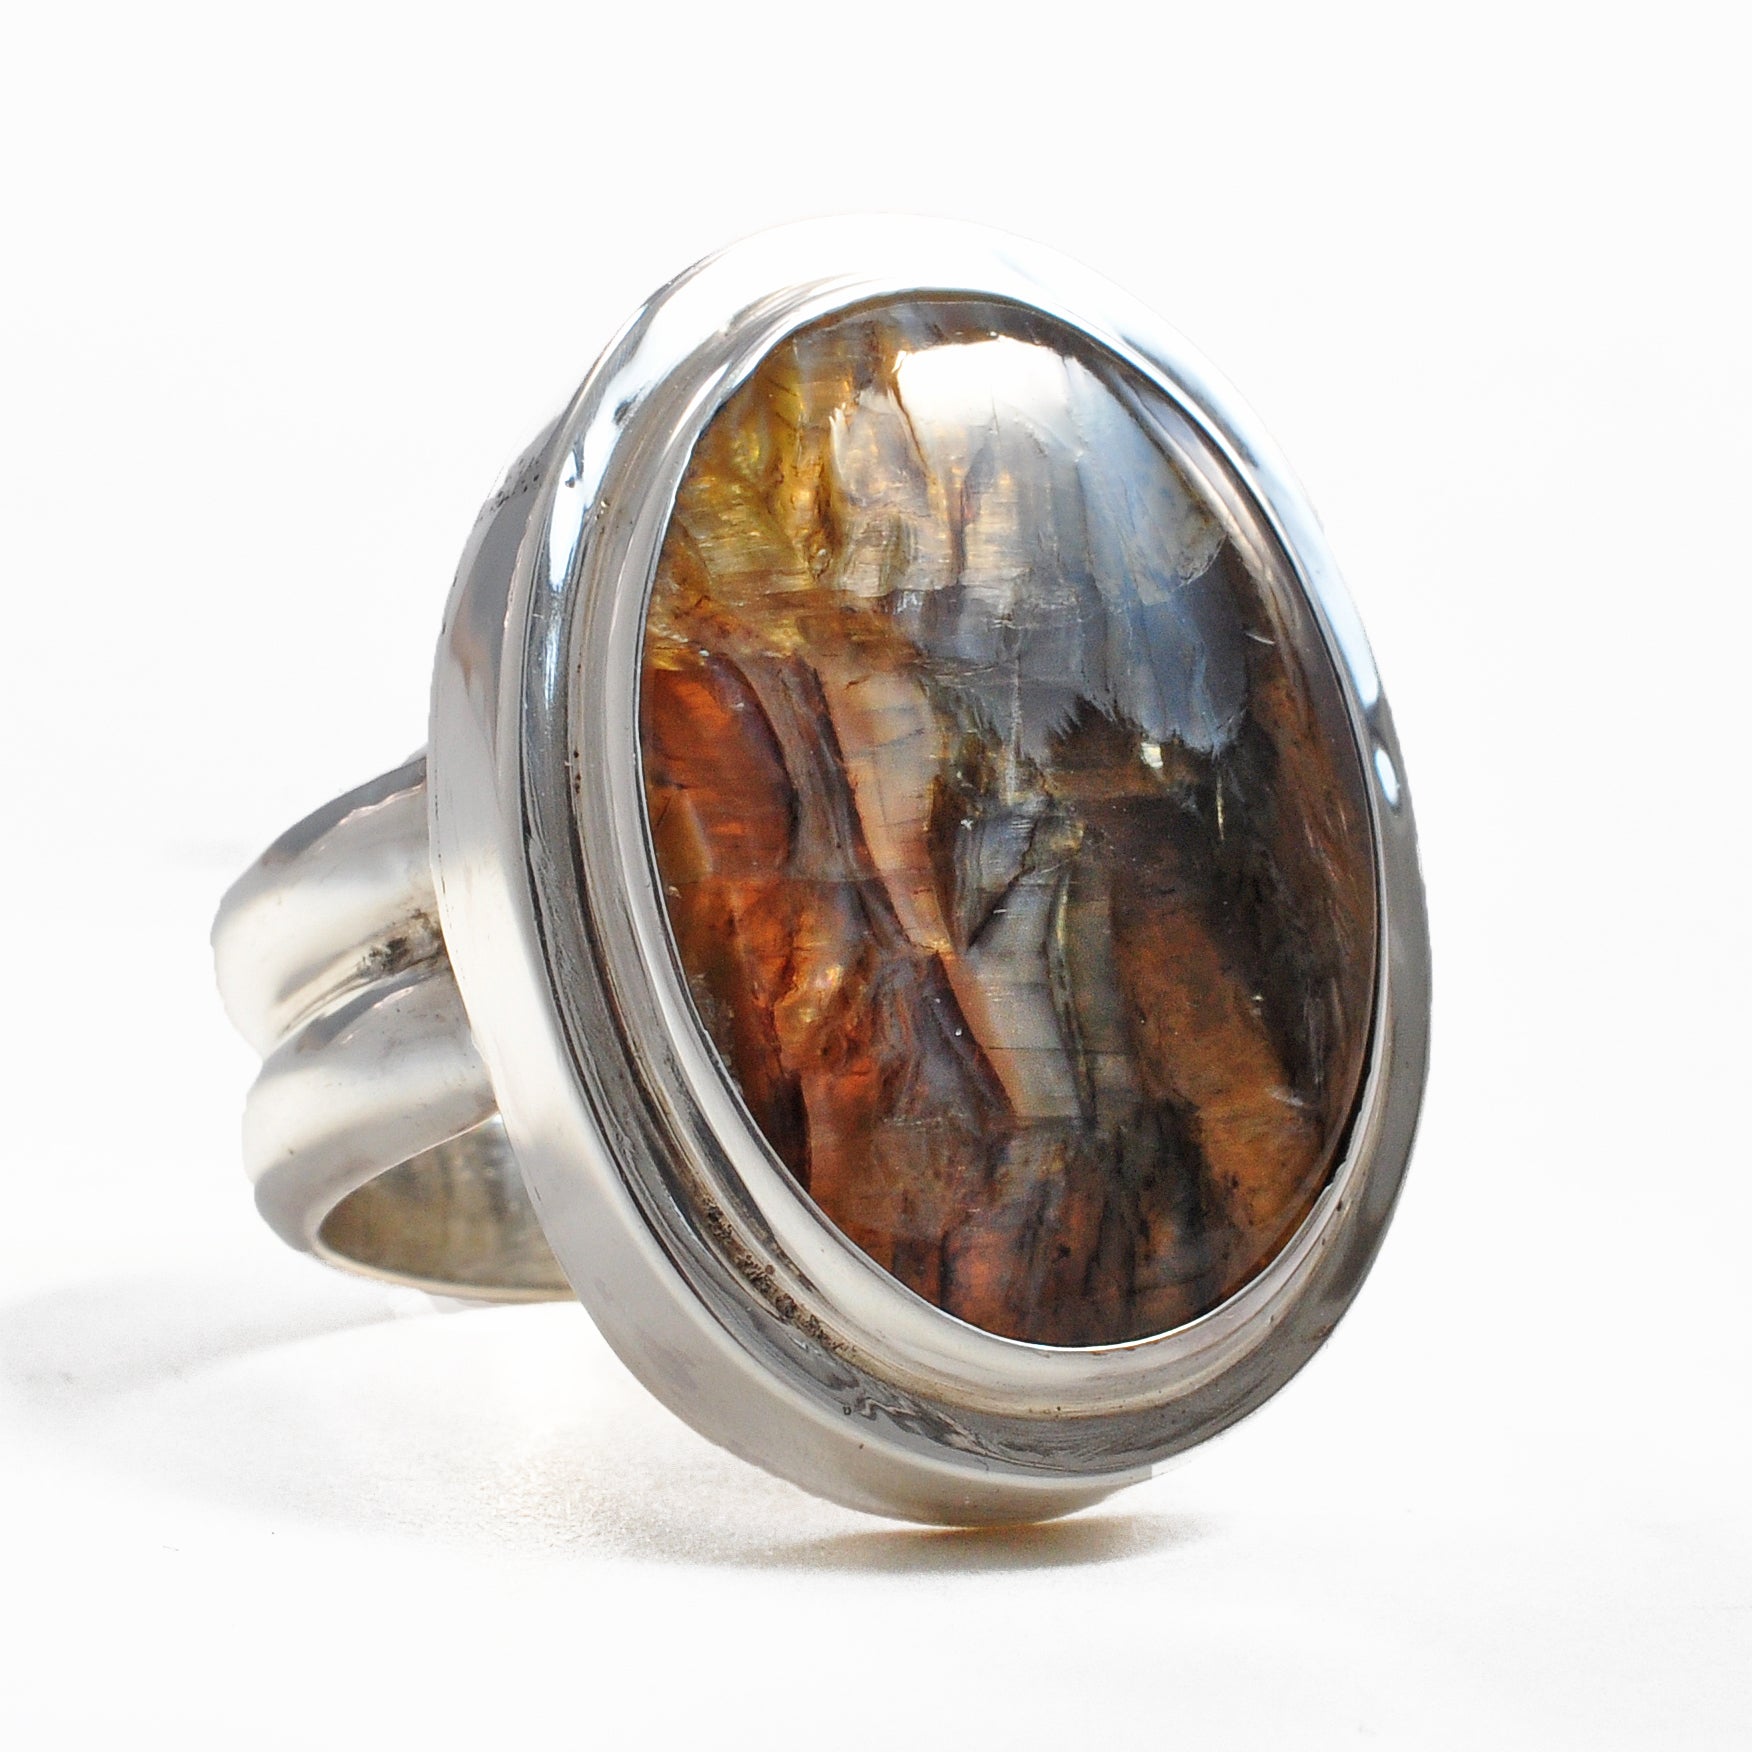 Arizona "Tiger's Eye" 20.97 mm 11.69 ct Oval Cabochon Sterling Silver Handcrafted Ring - SO-098 - Crystalarium